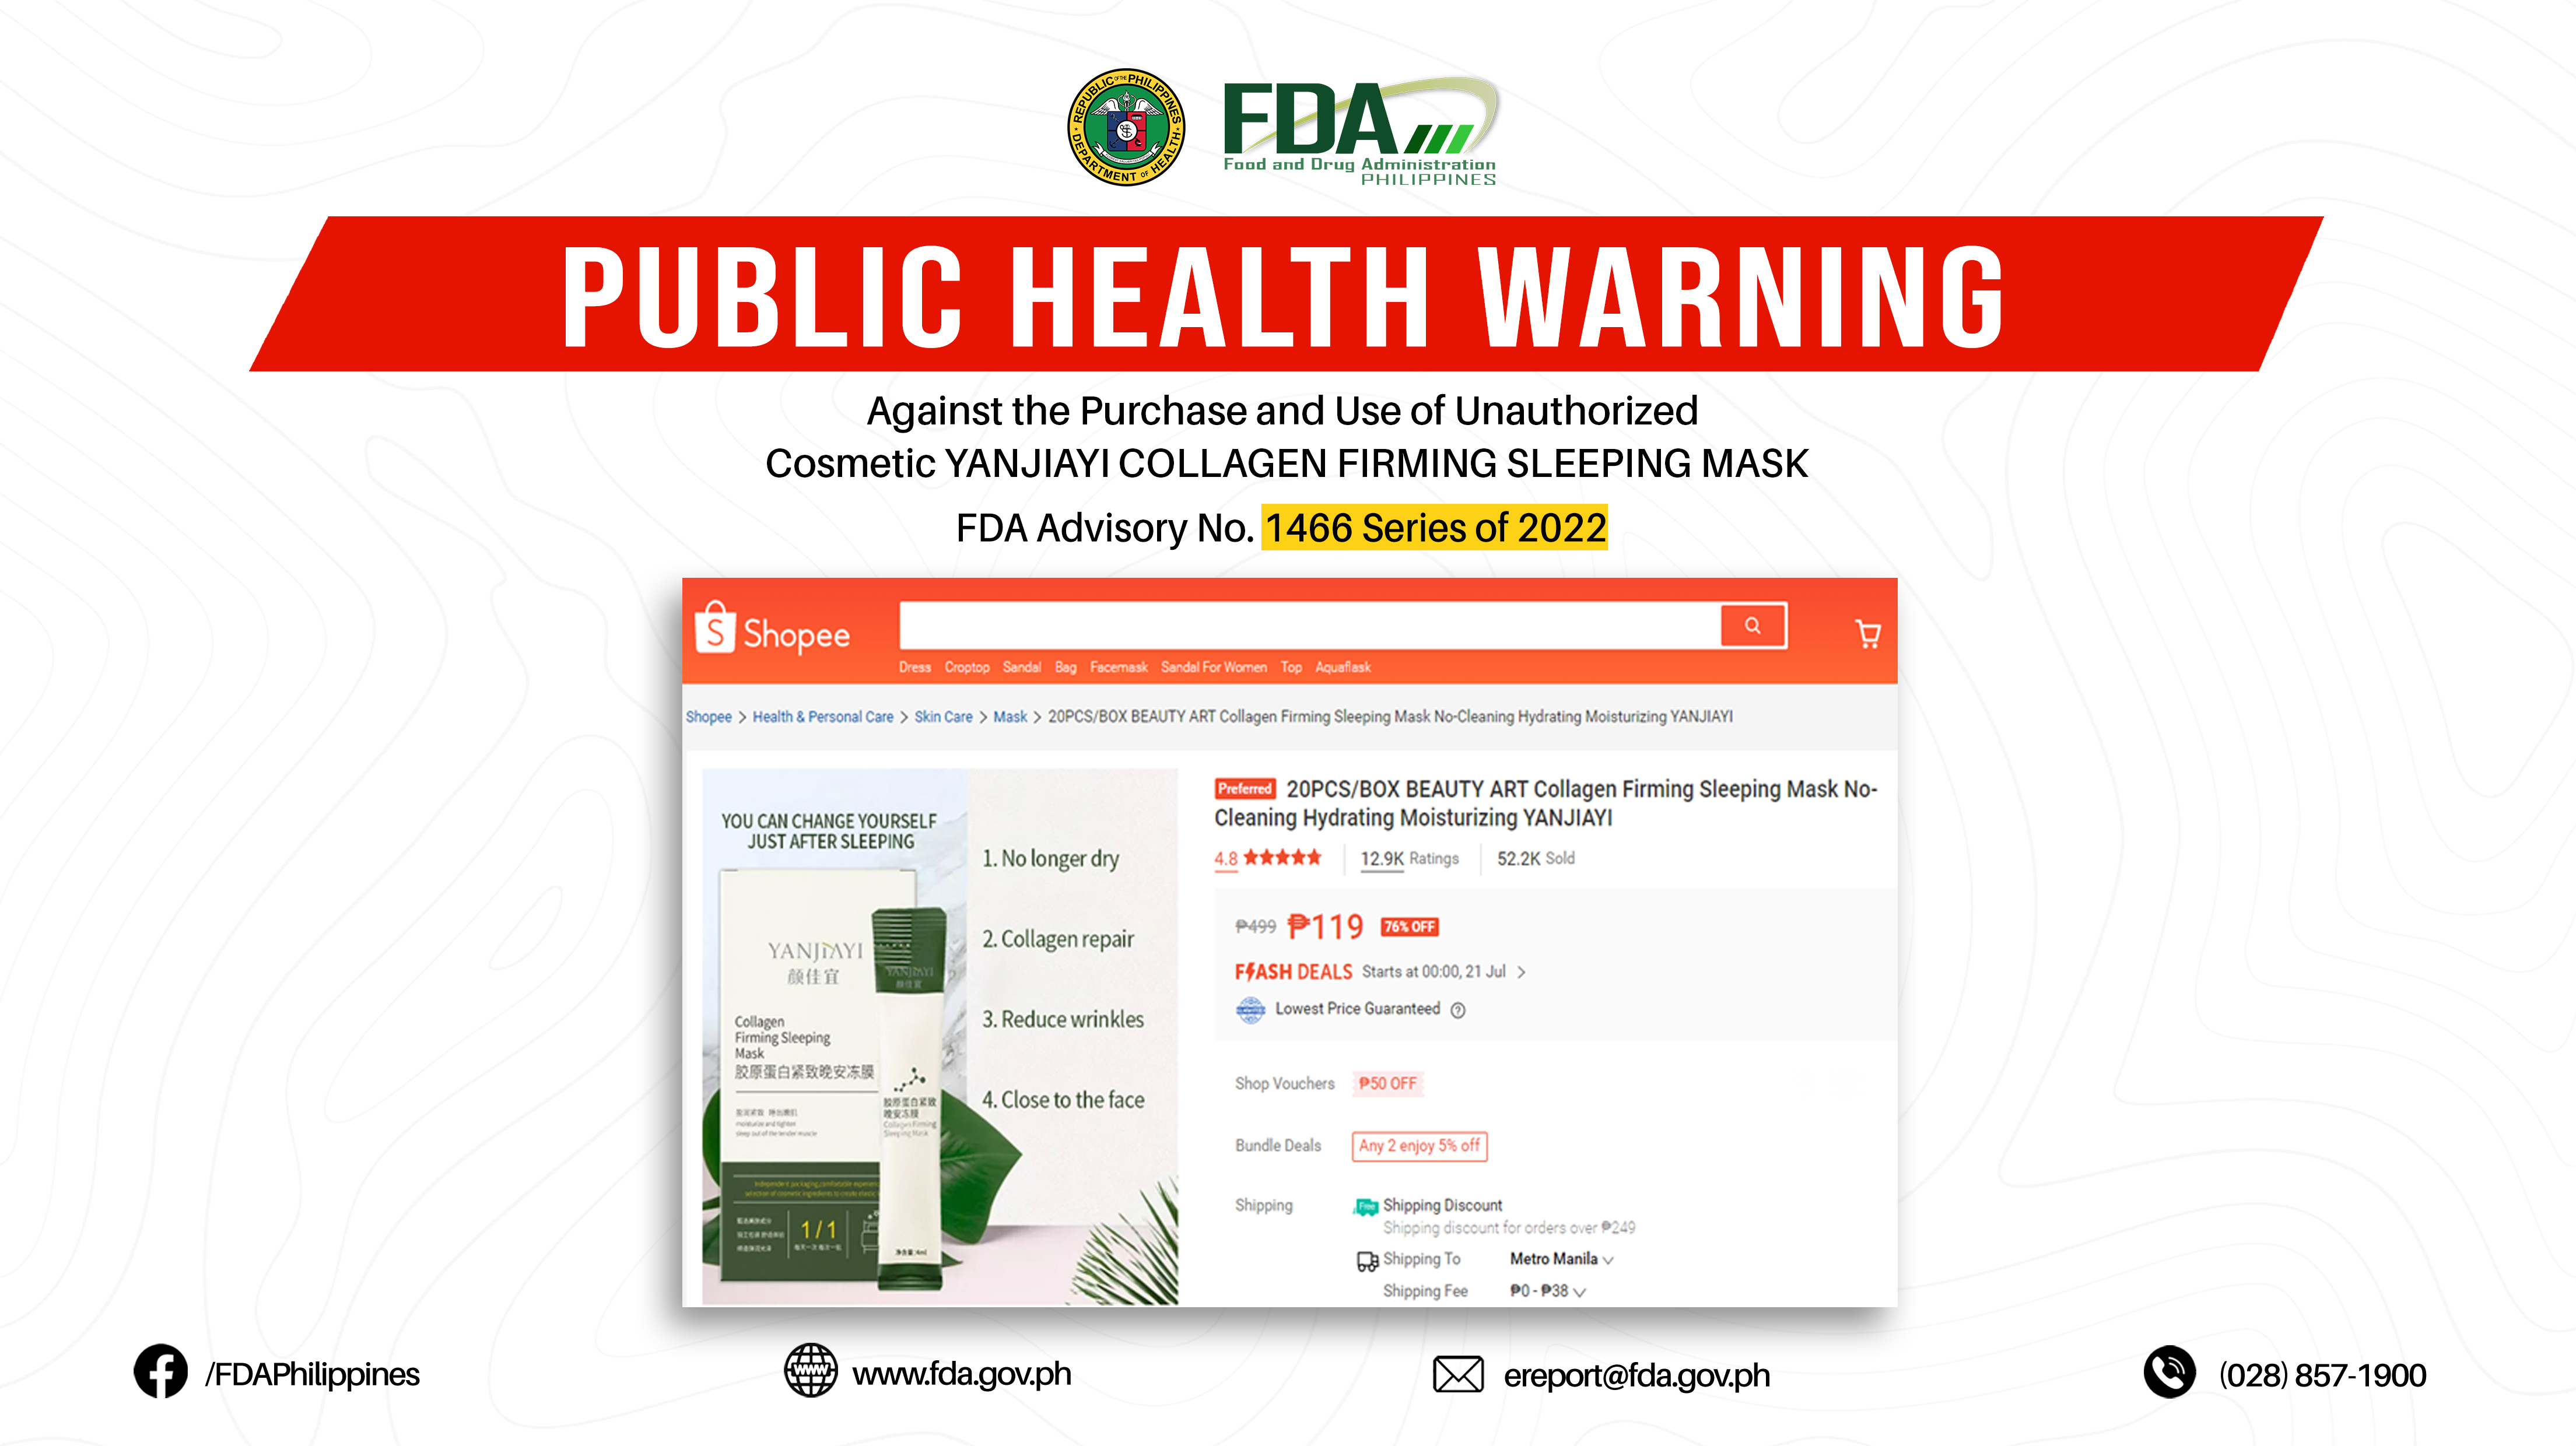 FDA Advisory No.2022-1466 || Public Health Warning Against the Purchase and Use of Unauthorized Cosmetic YANJIAYI COLLAGEN FIRMING SLEEPING MASK